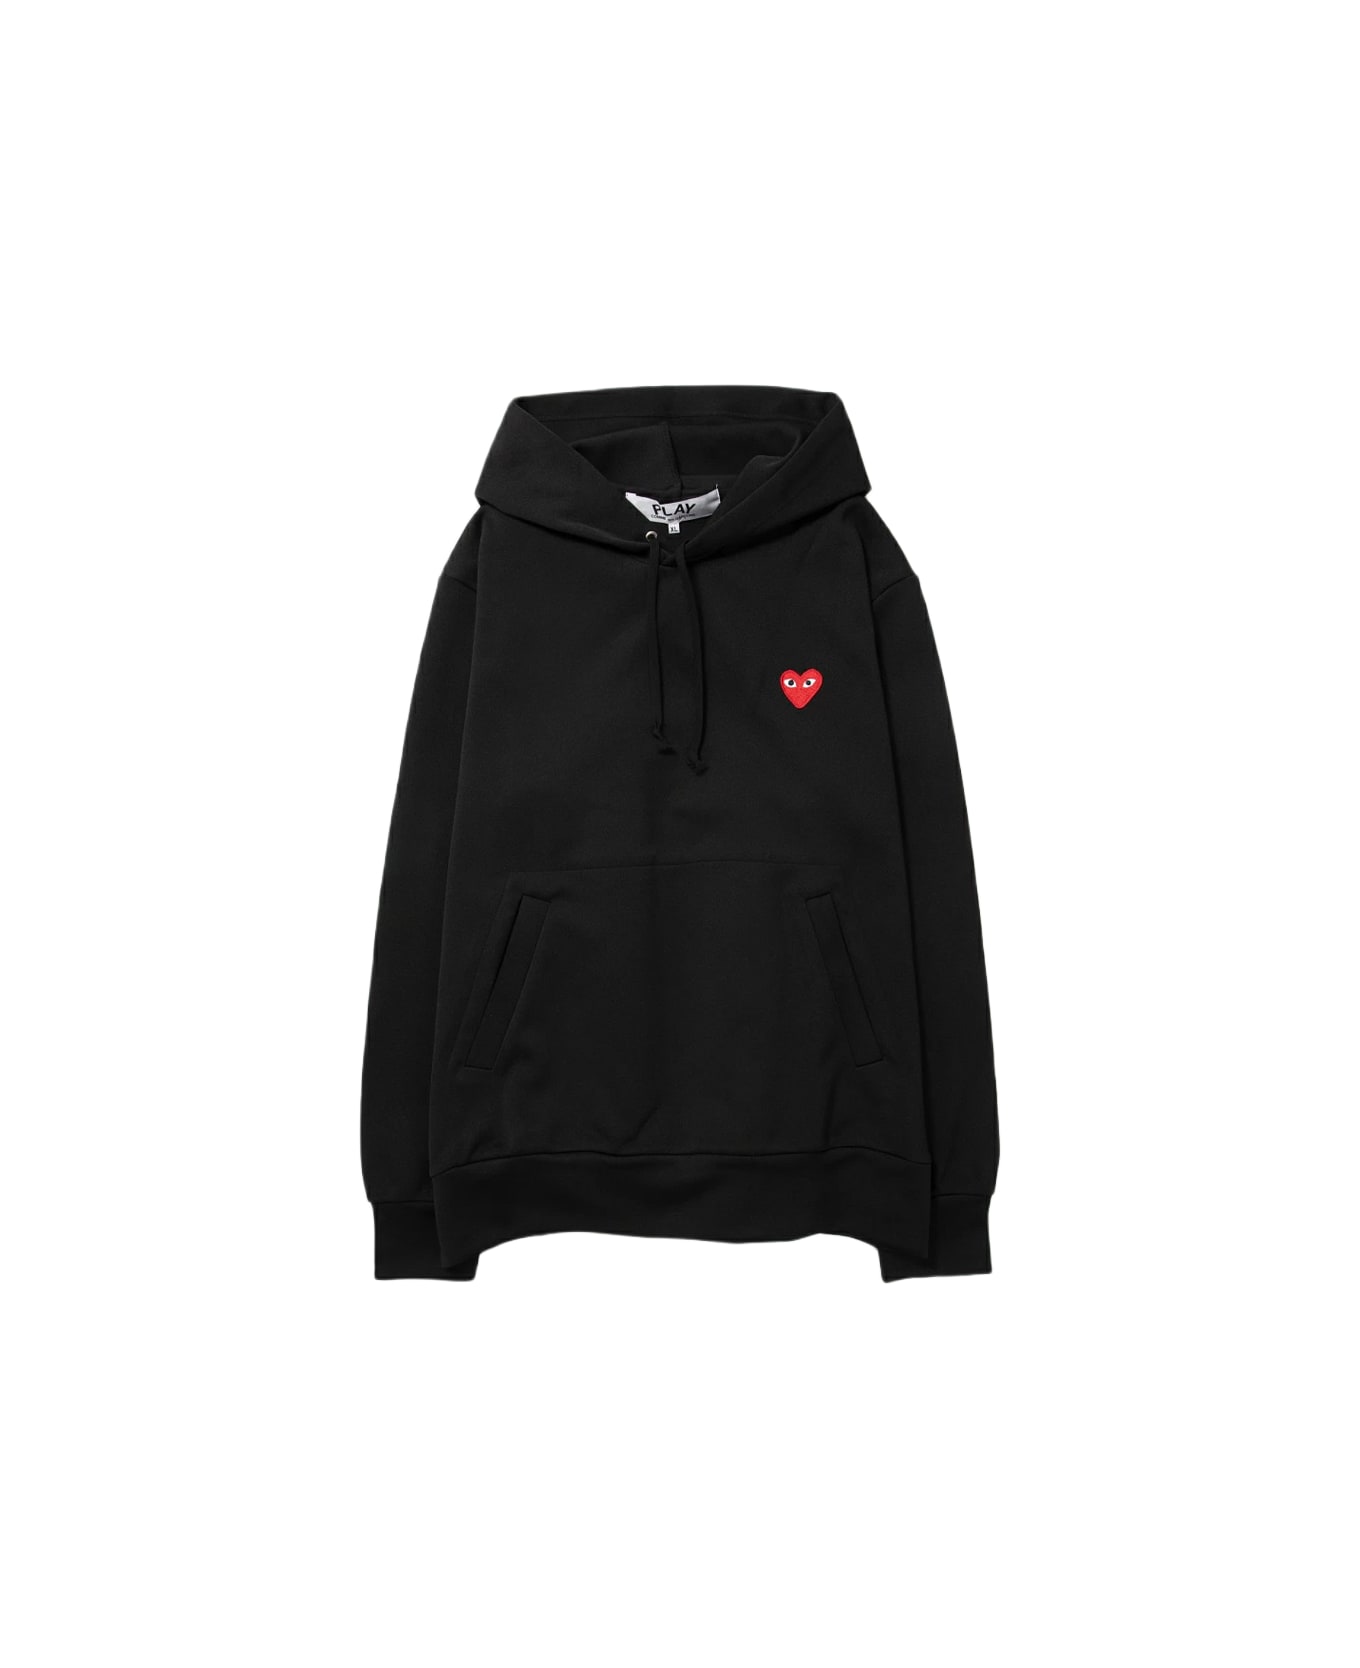 Comme des Garçons Play Mens Sweatshirt Knit Black hoodie with heart patch at chest - Nero